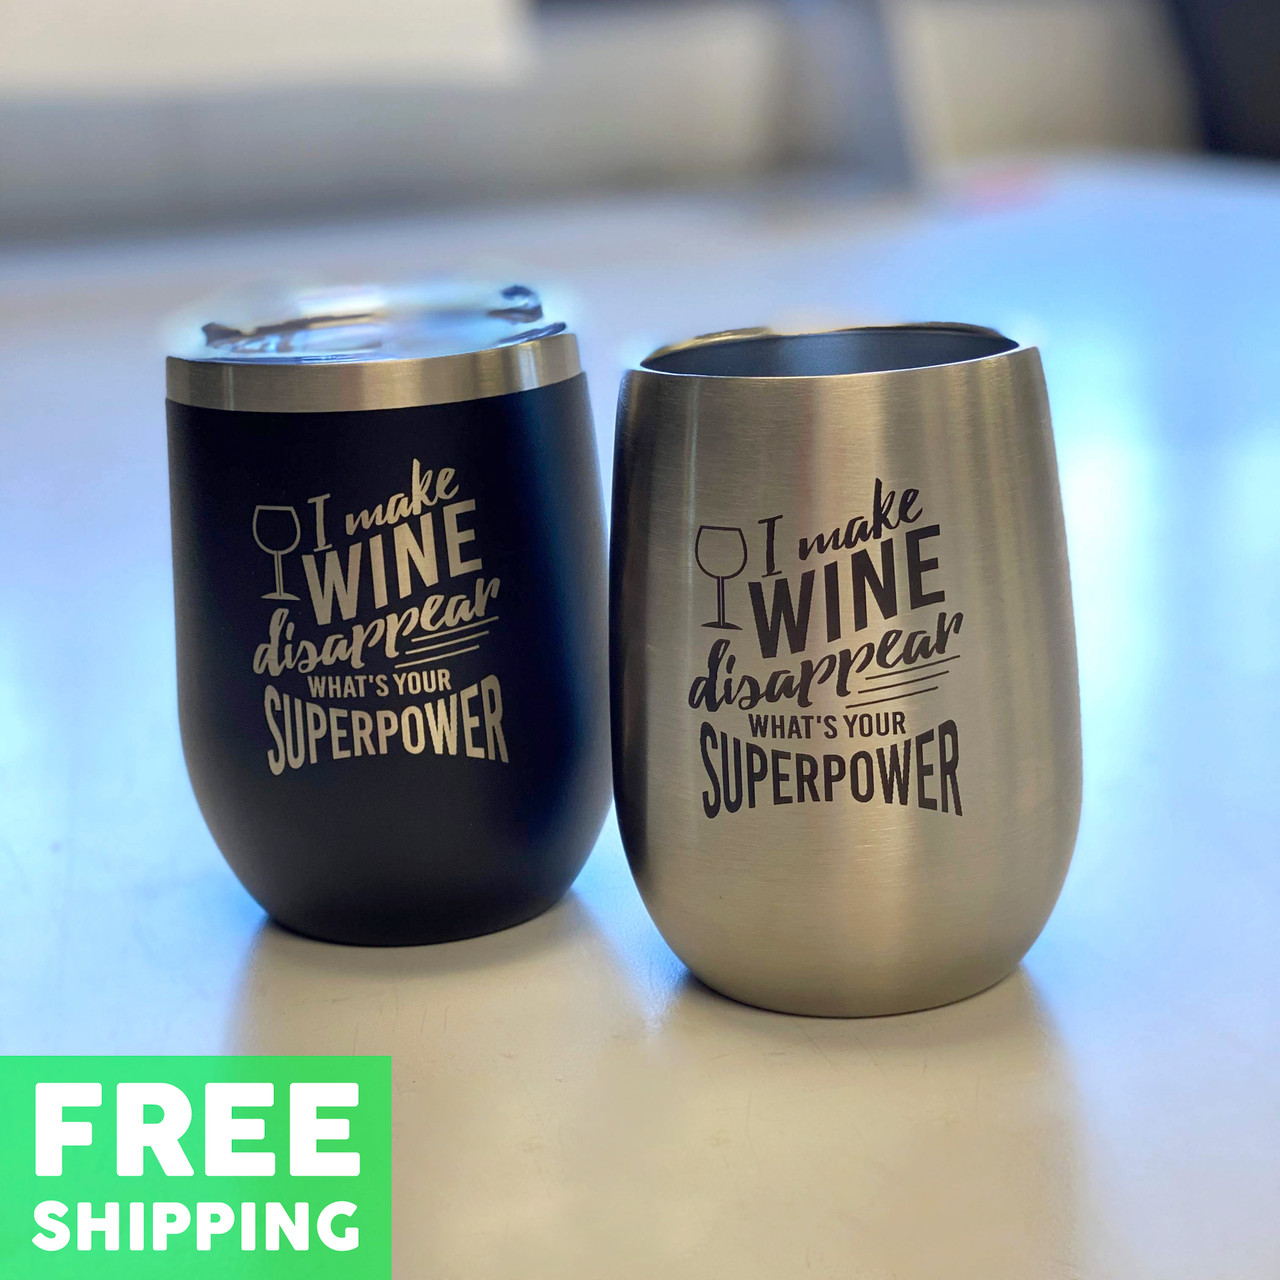 https://cdn11.bigcommerce.com/s-pza6oiin/images/stencil/1280x1280/products/9850/17192/imakewinedisappearengraved12ozstainlesssteelwinetumblerwithlid_3506_freeshipping__65655.1586536163.jpg?c=2?imbypass=on